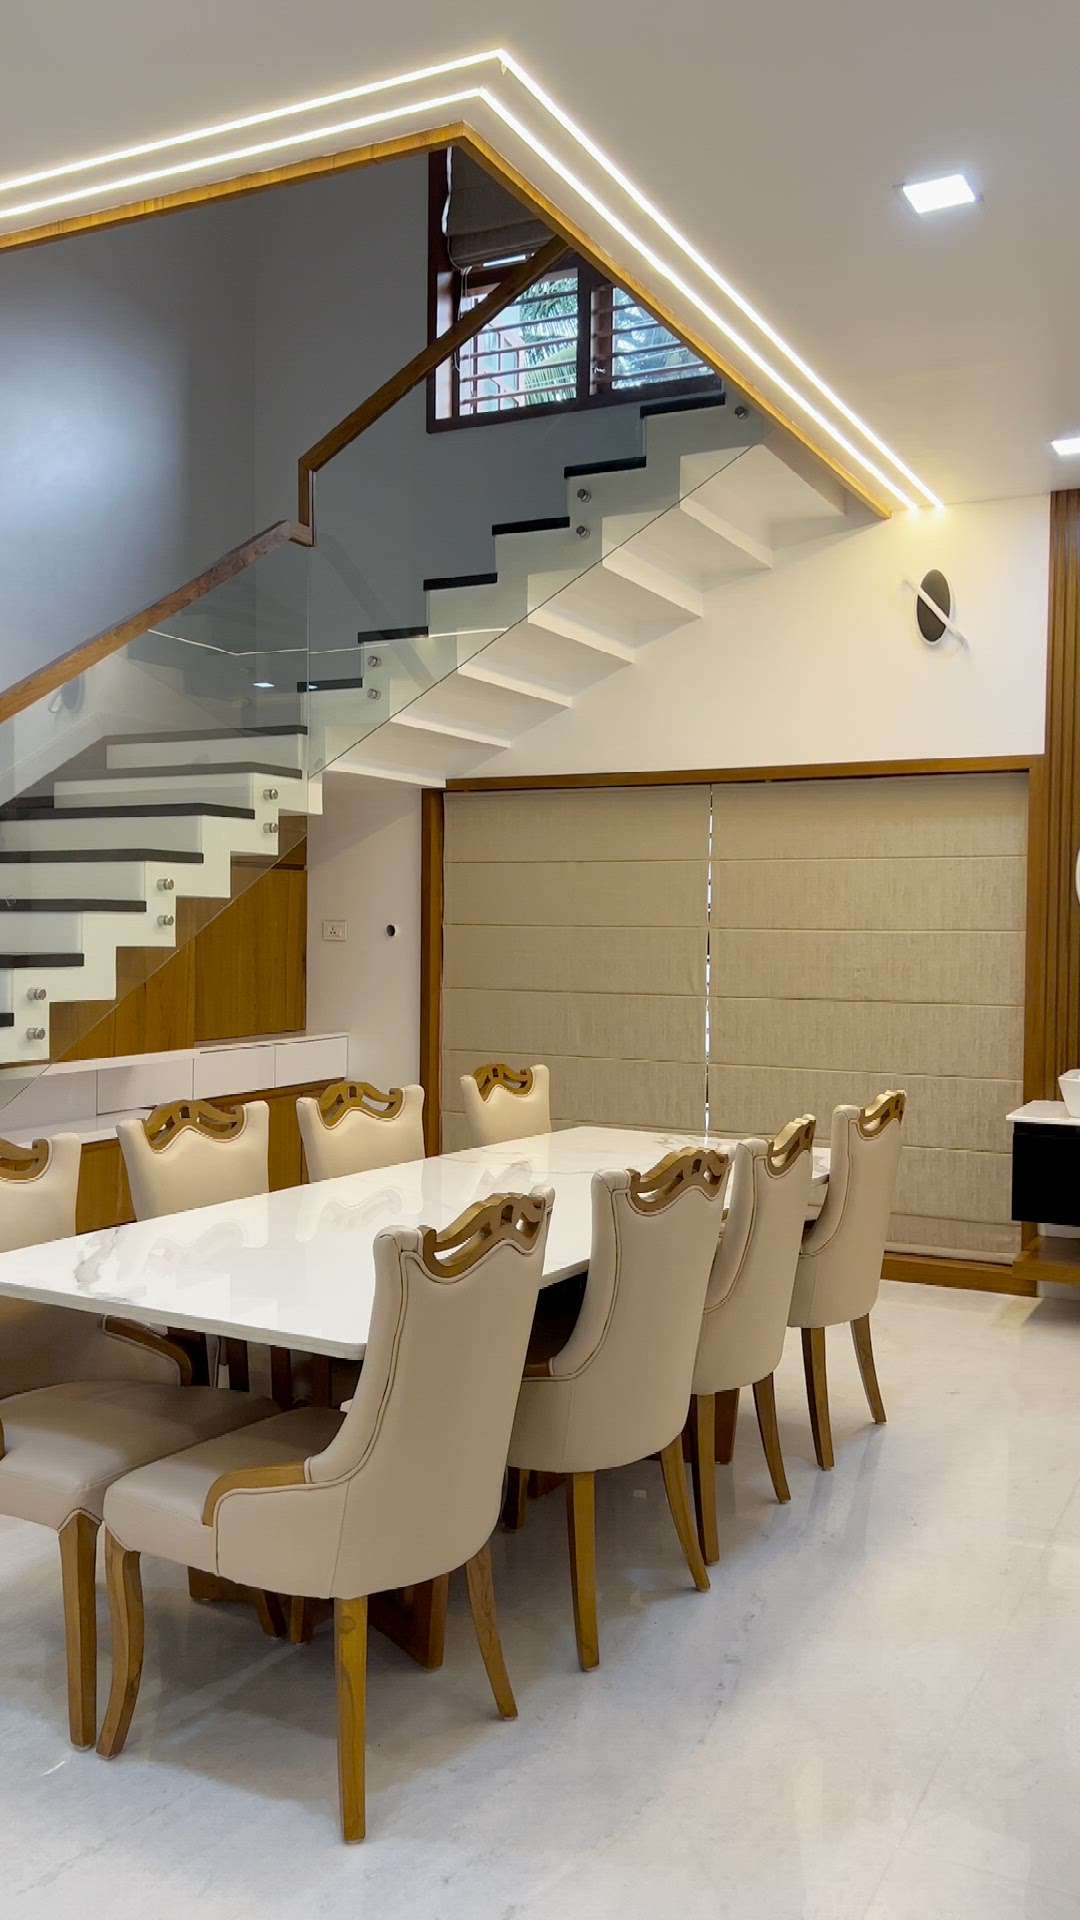 Finished home interior

Making Better Livings !
www.wudleaf.com

For Your Interior Requirements
Feel Free to Contact : +91 9744900025
wudleaf@gmail.com

#instagood #interiordesigner #wudleaf #interiordecor #dining #interior #interiorstyling #kolo #houzz #homeinspiration #kerala #malappuram  #wudleafinterio #viral #trending #happy #beutiful #keralagram #keralahomes #keralahomedesign #archilovers #architecture #trendingreels #modernliving  #luxuryinteriors #manjeri #interiorlovers #keralatourism #modernfurniture #luxuryliving